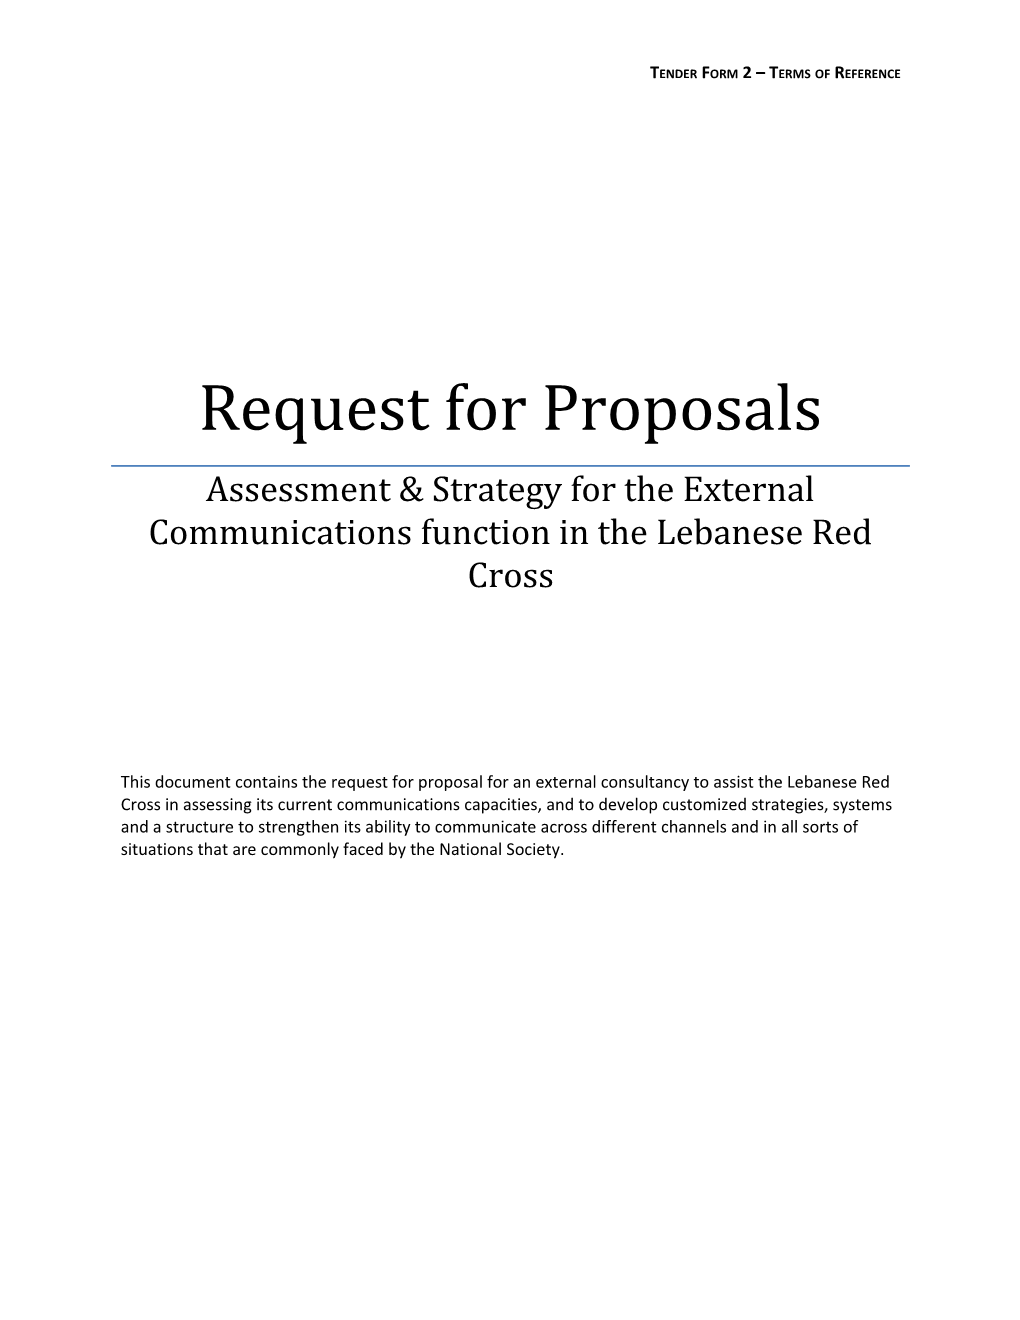 Request for Proposals s63